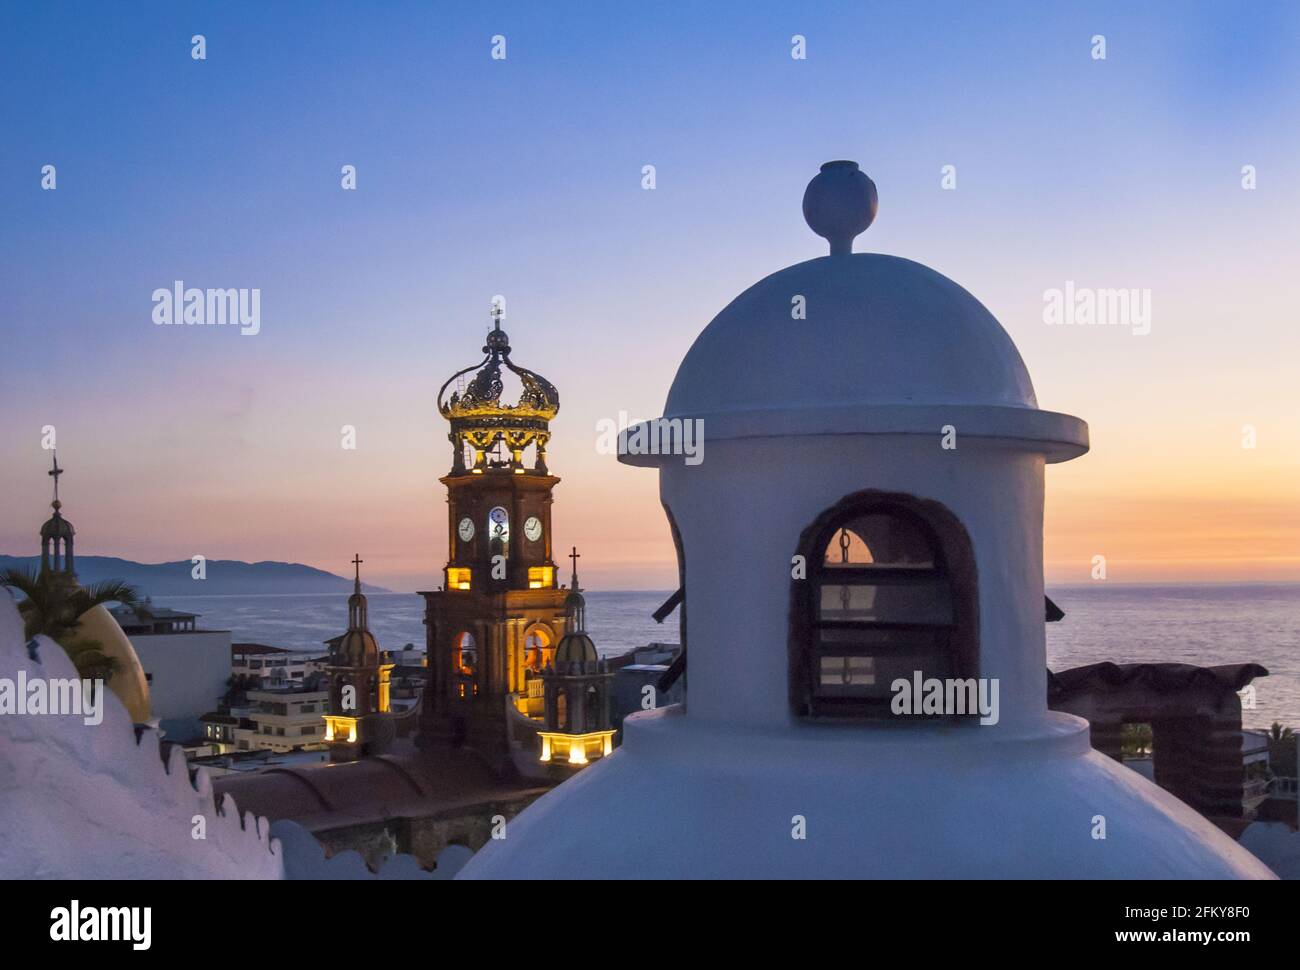 Rooftop cupola and the steeple of Our Lady of Guadalupe Church are icons of colonial urban architecture in “Romantic Zone” of Puerto Vallarta. #613PV Stock Photo